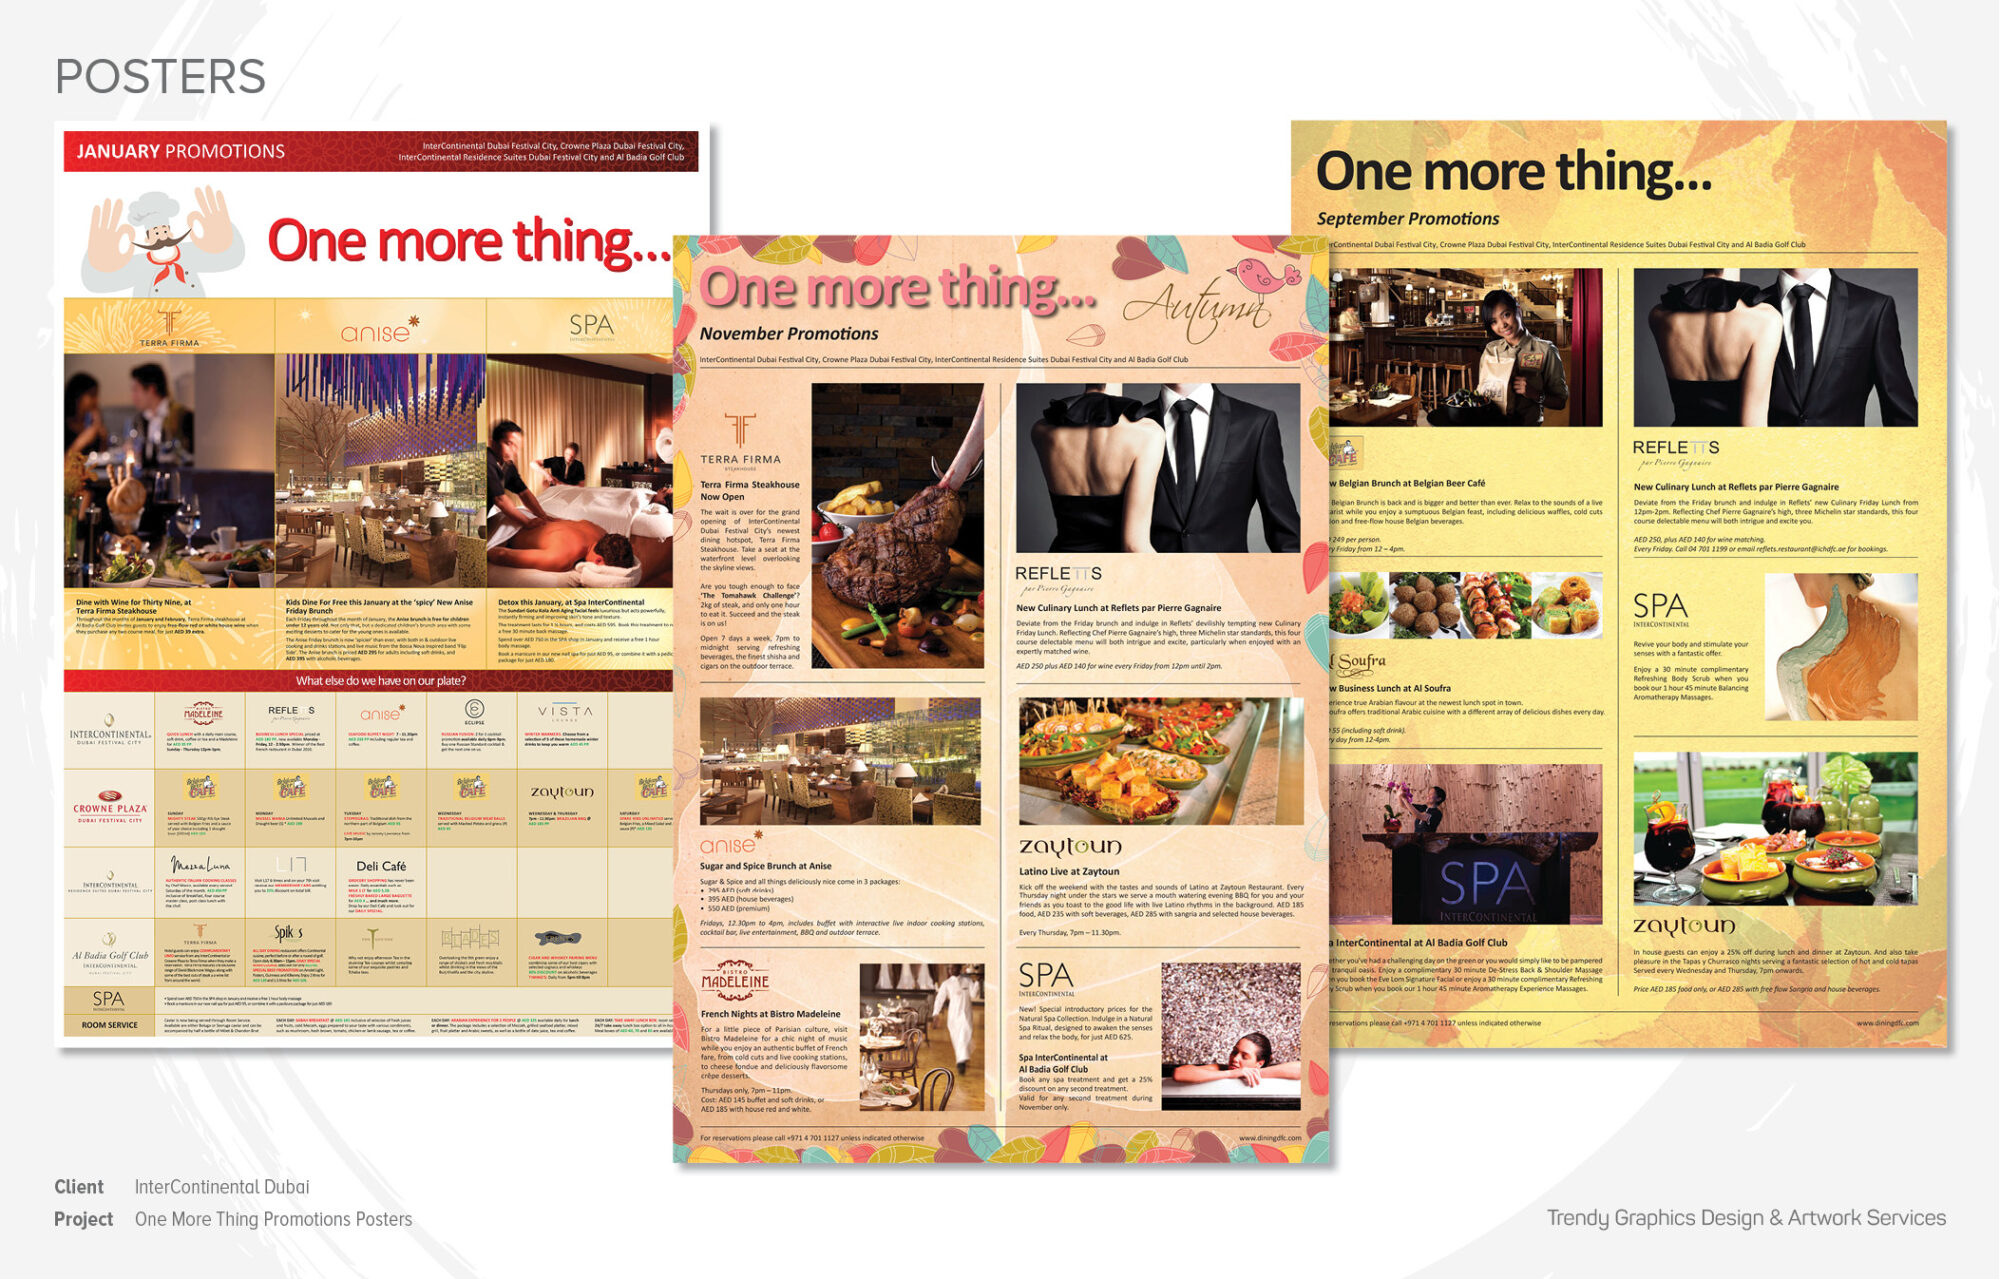 InterContinental Dubai – One More Thing Promotions Posters